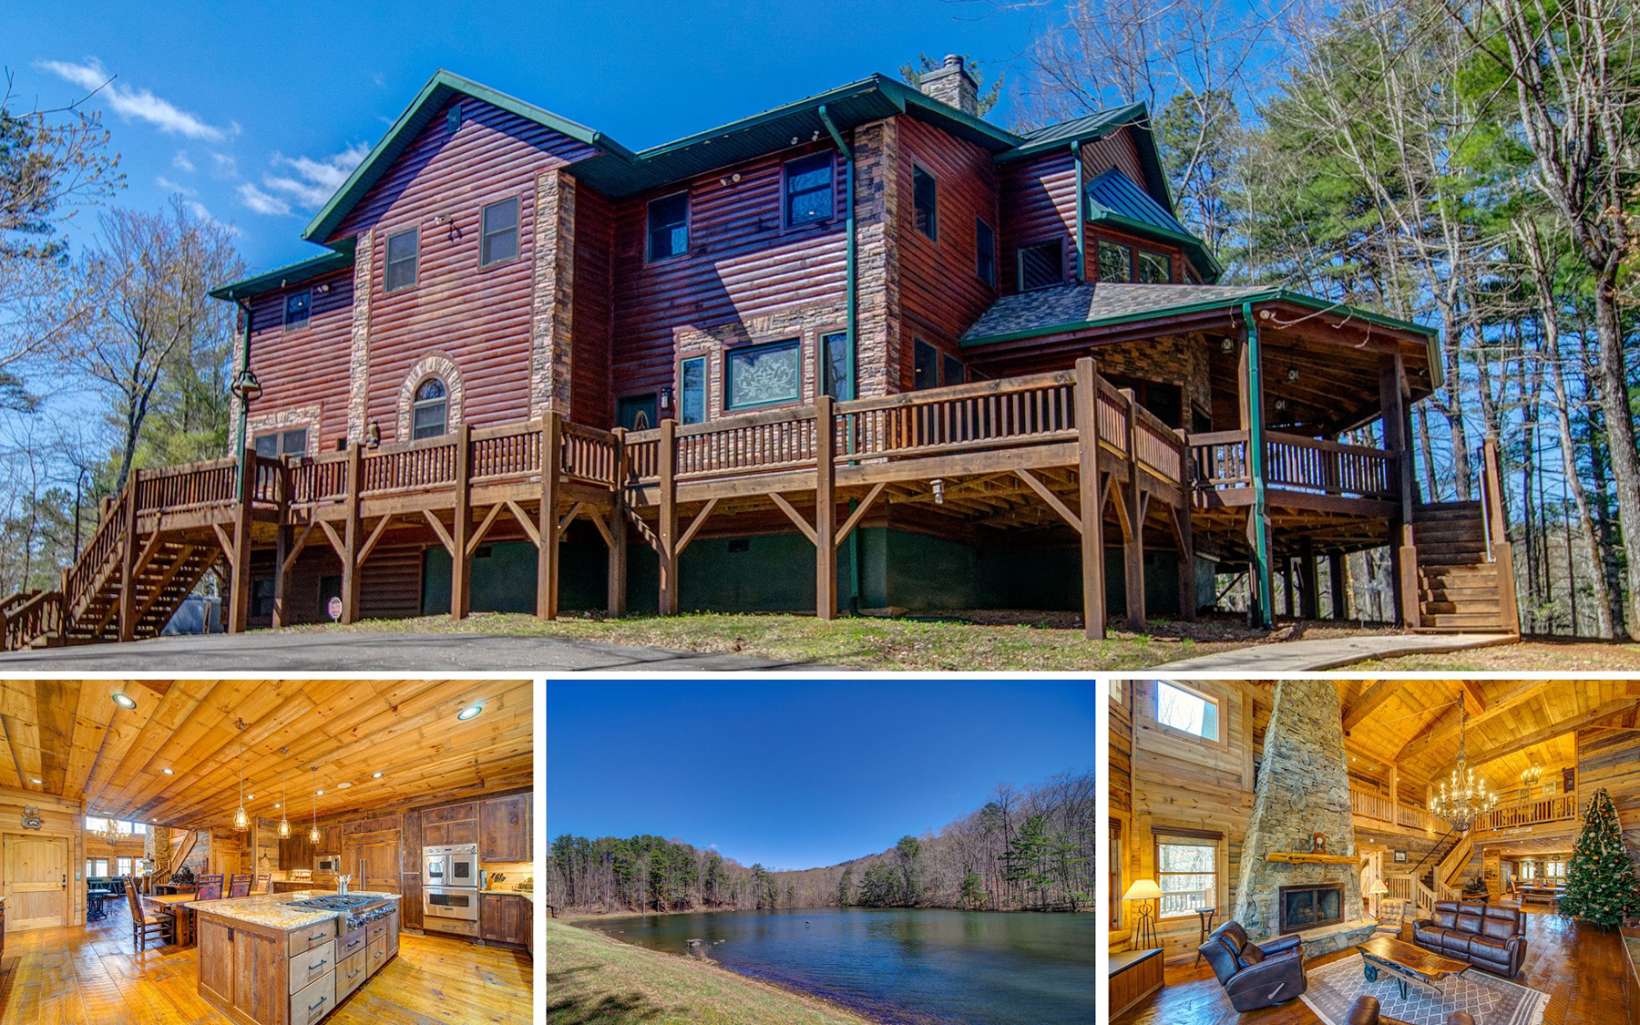 This stunning 12.25+/- acre mountain retreat offers everything you'll need to get away and enjoy the gorgeous Owltown Retreat community. Drive past the lake's glistening blue waters and up the road, where you'll arrive at this beautiful cabin estate. Walk in the front door and let the 2-story great room take your breath away with a towering stone fireplace and hanging grand chandelier. The warmth of the interior timber is beautifully accentuated by the luxury finishes throughout the home. Past the great room, the eat-in kitchen boasts stainless steel appliances, a gas cooktop on the massive kitchen island, a walk-in pantry, and an elevator. Outside, enjoy a closer proximity to the surrounding scenery with a large screened deck area with another masterfully crafted fireplace, just one section of the huge wraparound deck offering 360 views. The main floor also offers not one, but two master bedrooms. Both include walk-in closets and stone showers. One of the master bedrooms also includes a unique stand-in soaking tub. Upstairs, balconies run along both of the great room, giving the whole home a sense of connection. A huge game room has a long bar, making it easy for game players to keep themselves from going thirsty! An additional 4 bedrooms, office, 2 full (and luxurious) bathrooms, and half bathroom complete the upstairs. The bottom level of the house has an additional guest-suite that includes its own kitchenette, a two-car garage, and tons of additional storage.